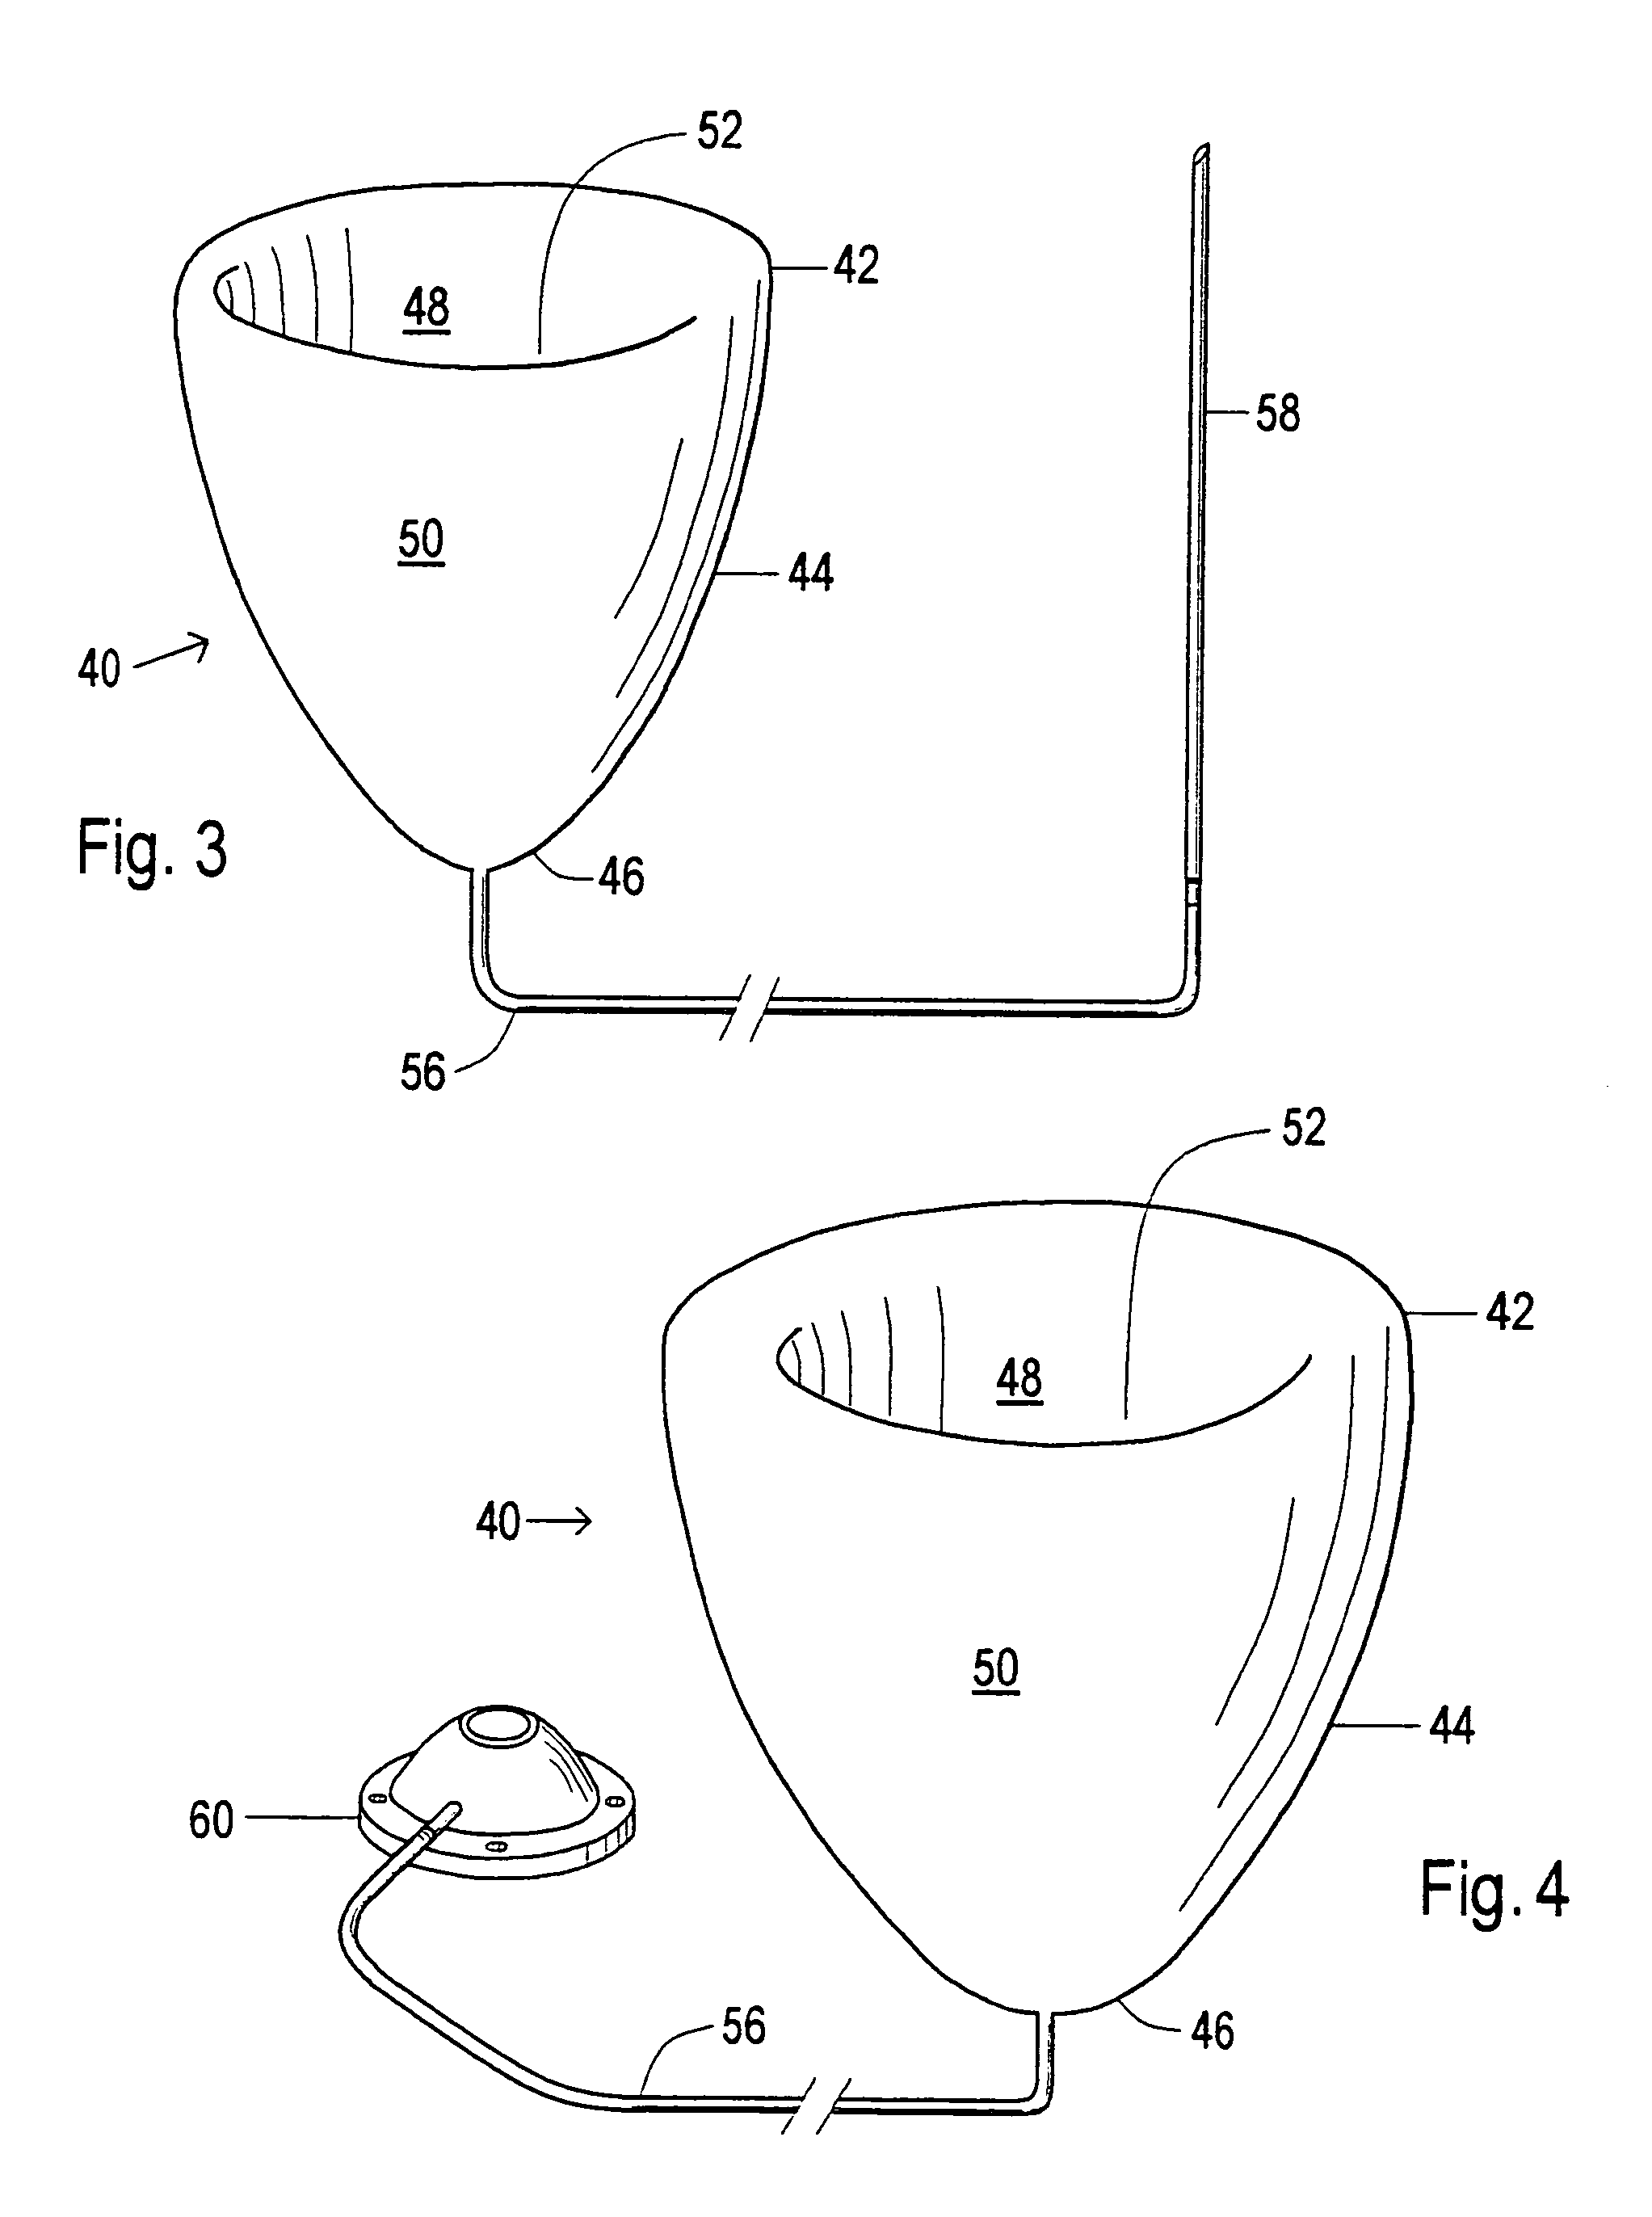 Device and method to control volume of a ventricle